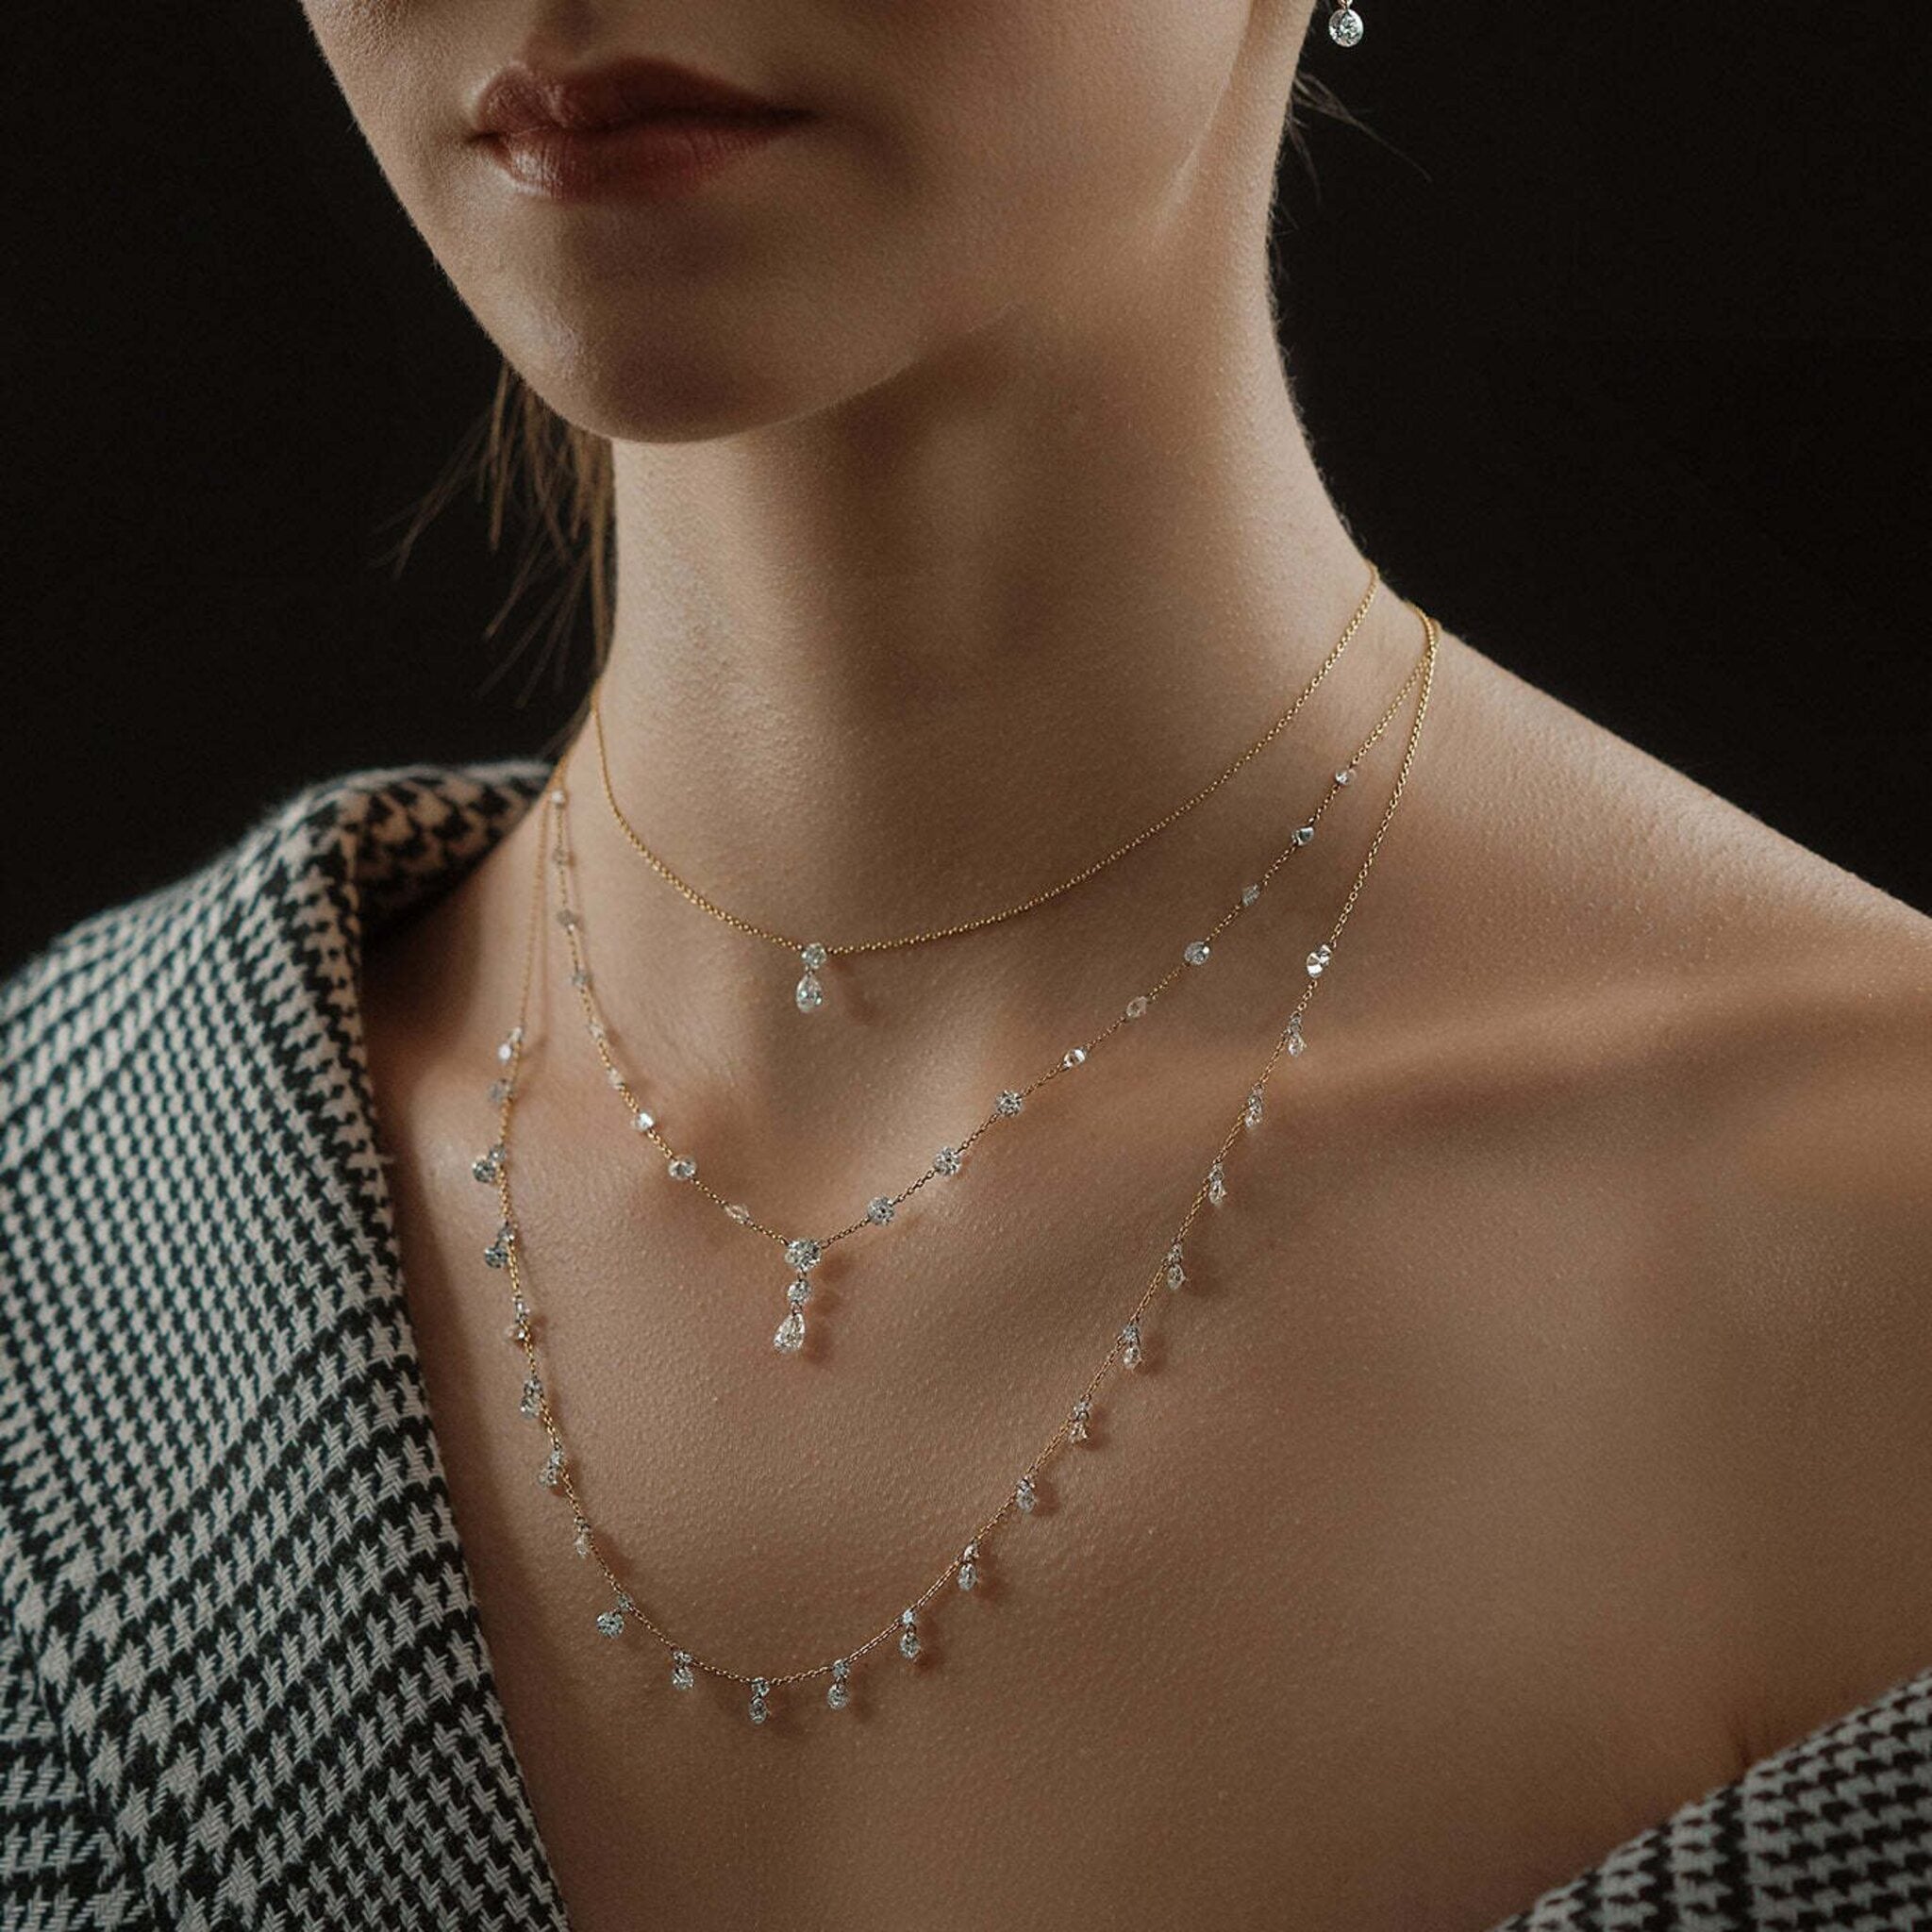 Aresa New York - Morrison No. 2 with Pear Necklaces - 18K White Gold with 0.40 cts. of Diamonds